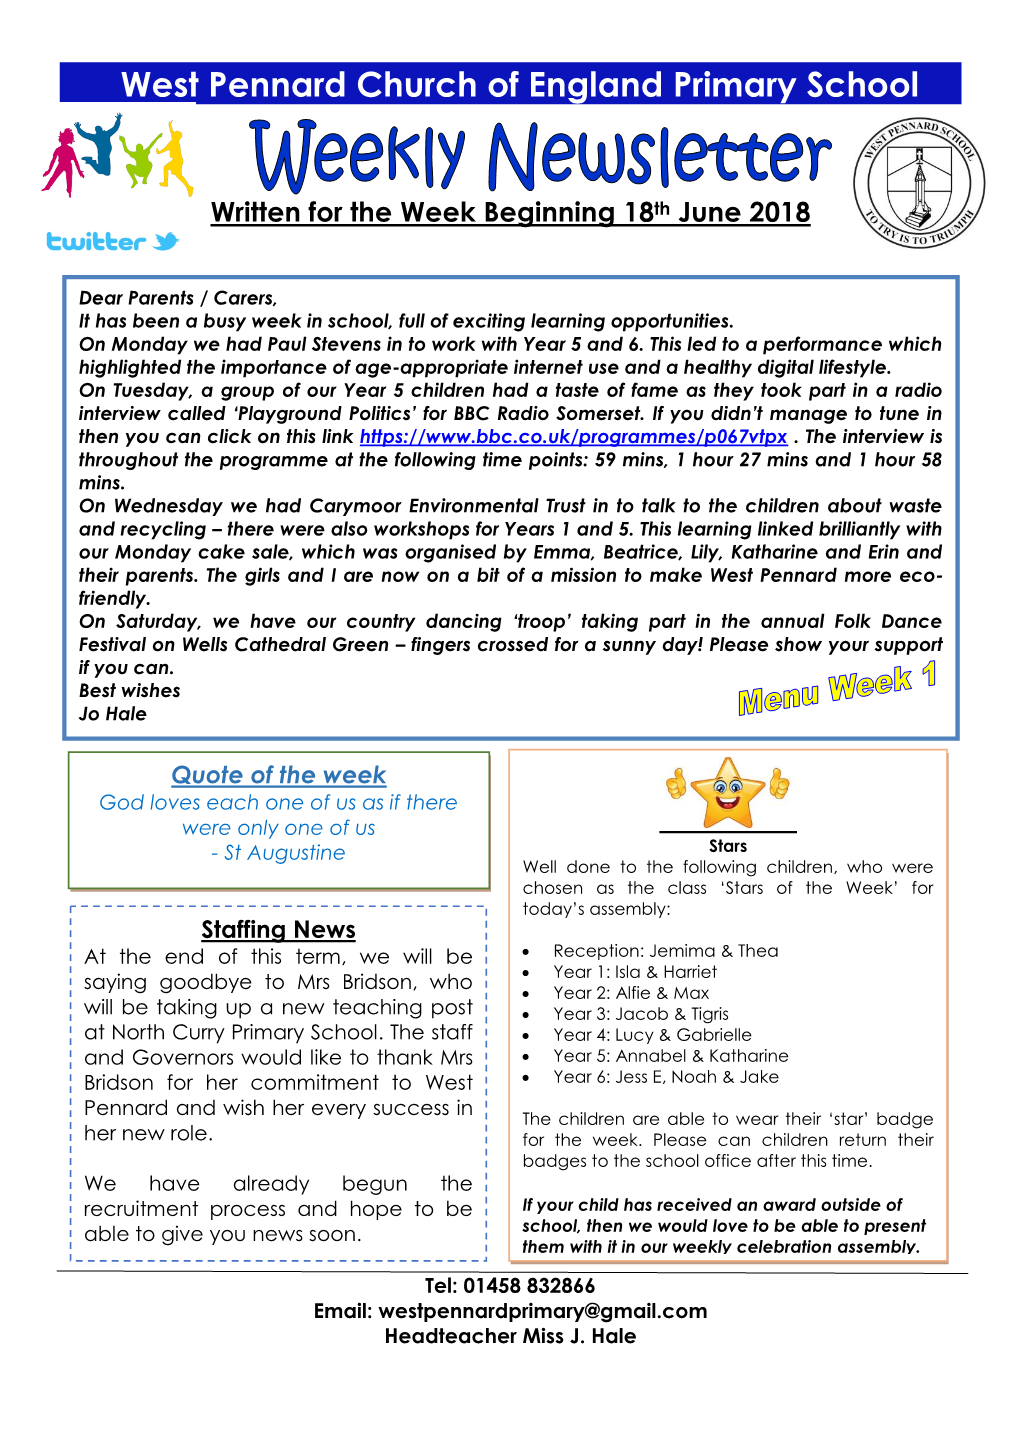 West Pennard Church of England Primary School Written for the Week